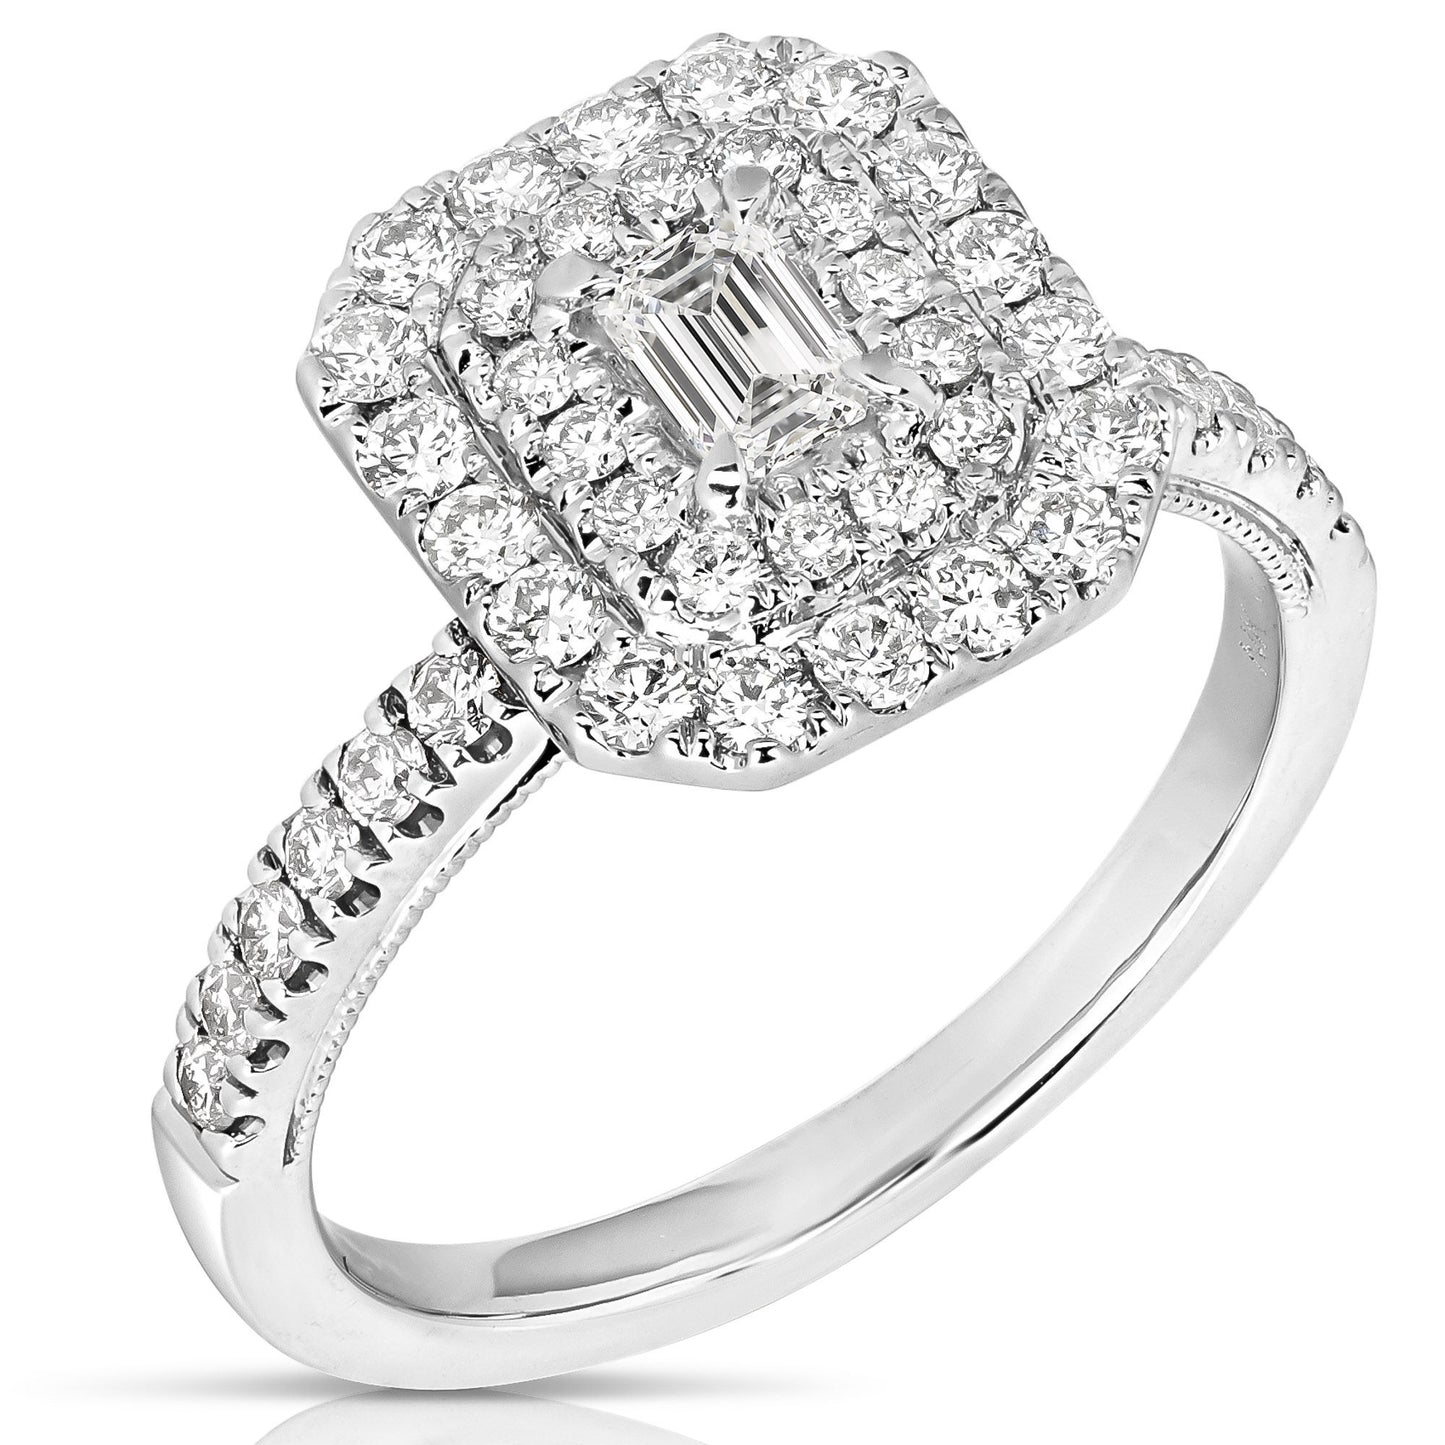 Double Halo Emerald Cut Engagement Ring